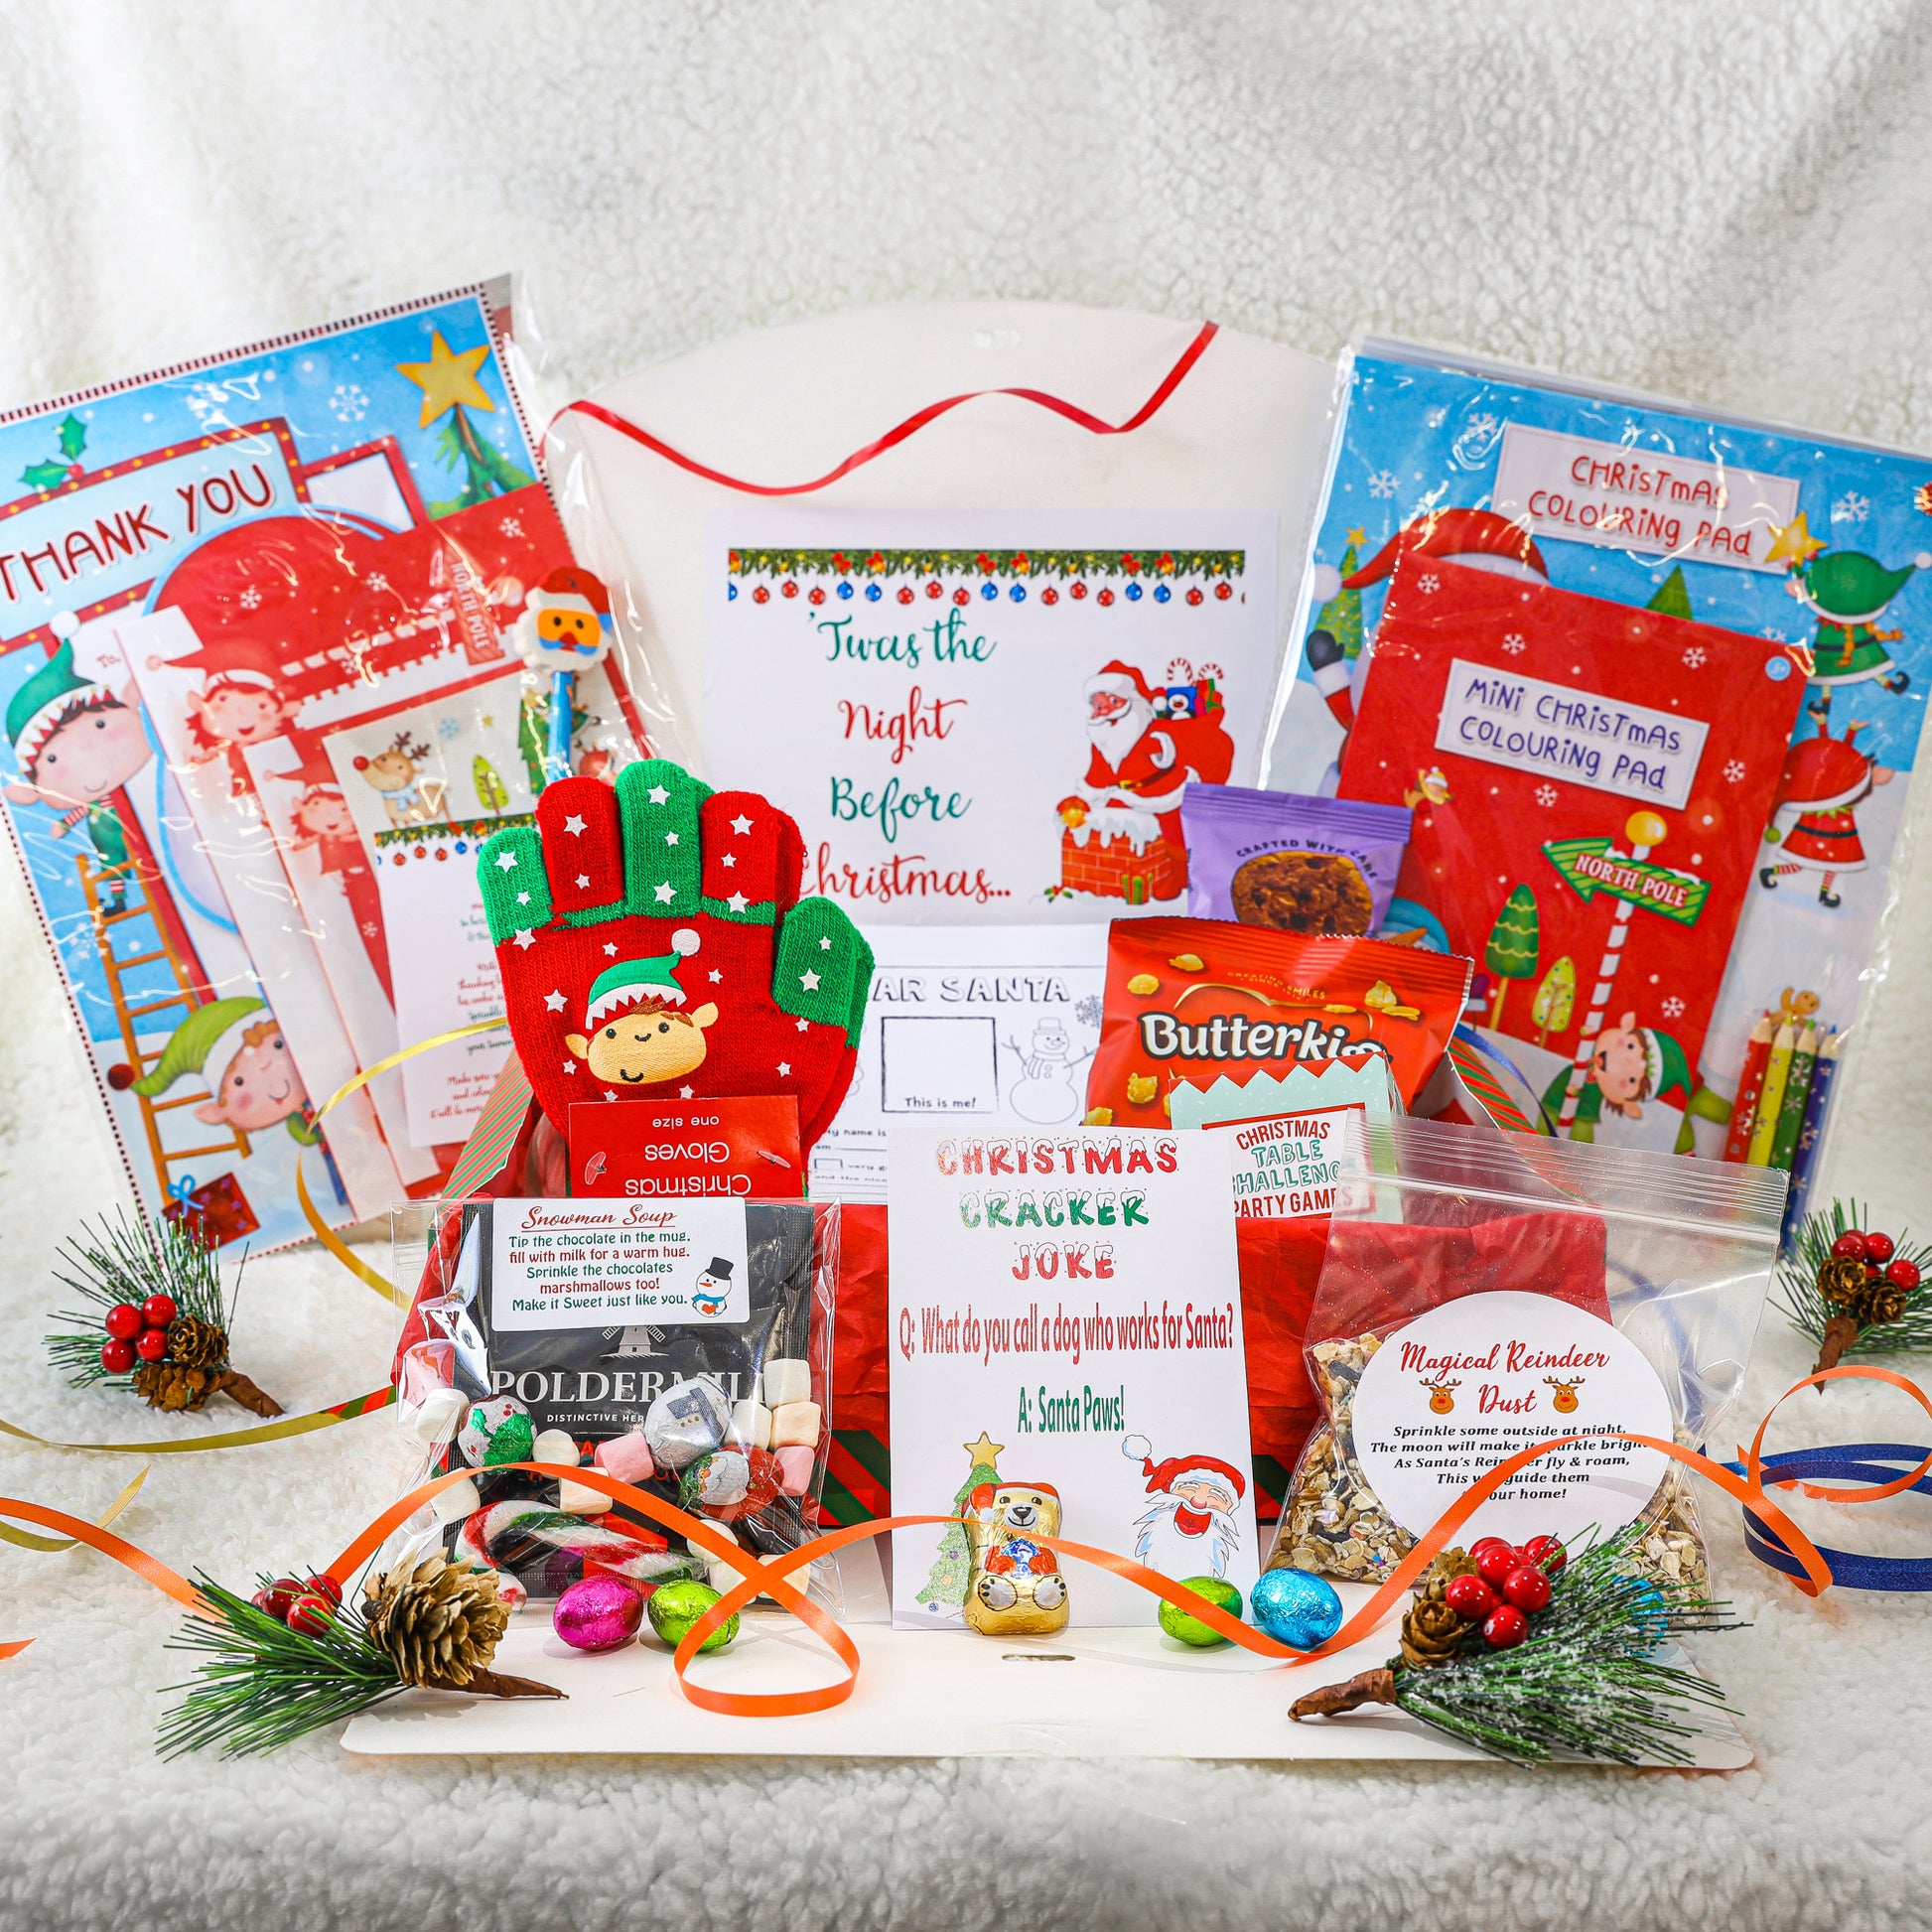 Personalised Christmas Eve Box Filled with Activities and Fun for Kids  - Always Looking Good - Christmas Eve Box  